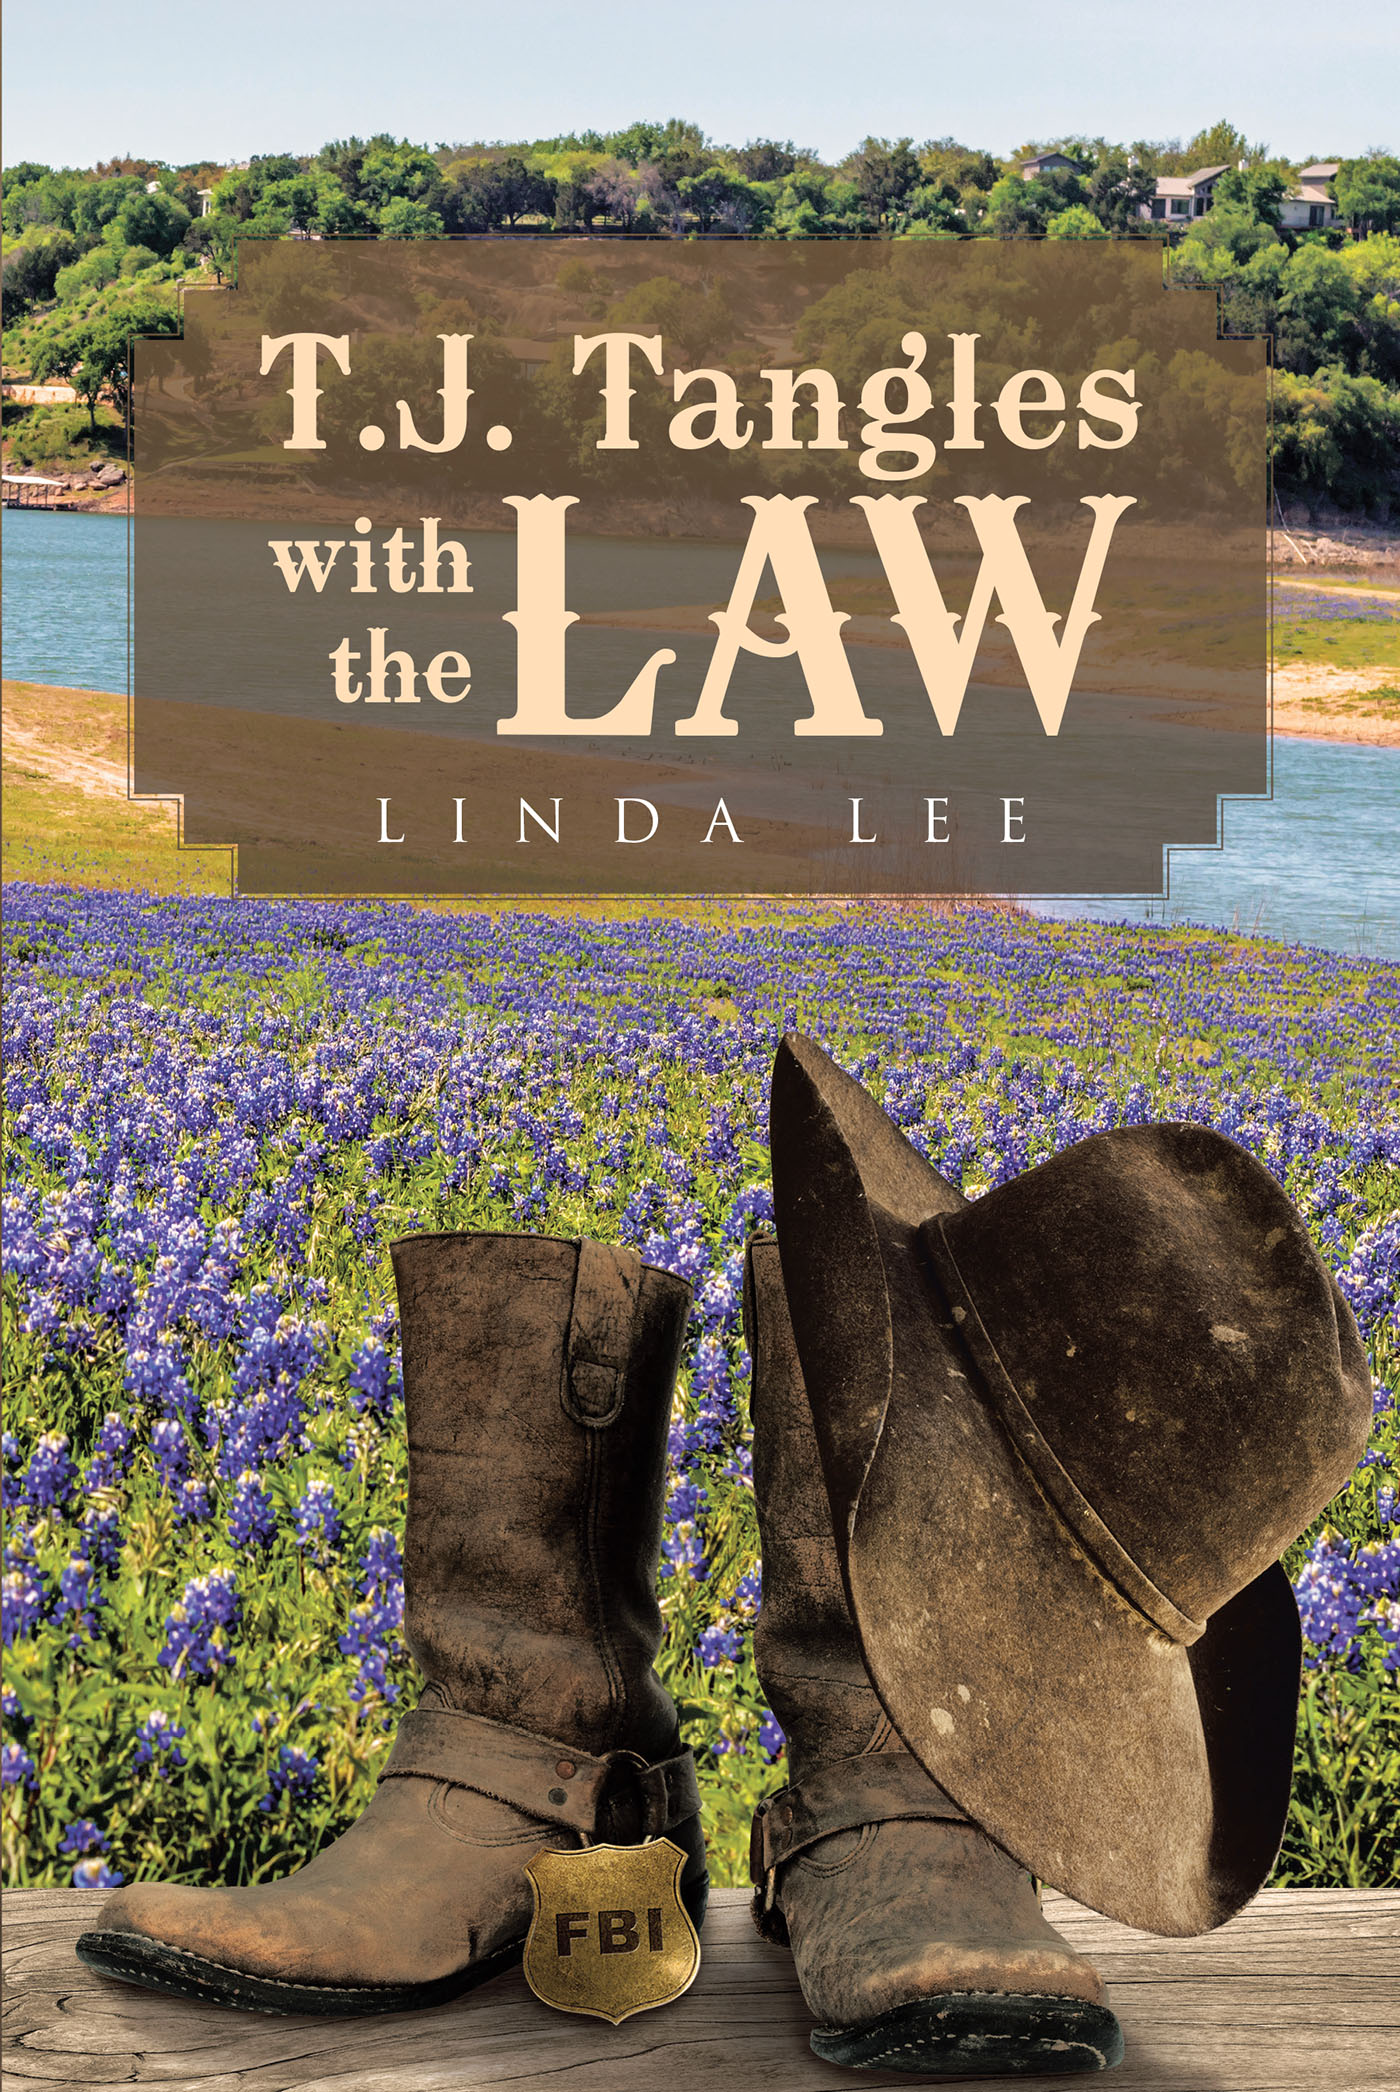 Author Linda Lee’s New Book, “T.J. Tangles with the Law,” Follows a Rancher and an FBI Agent Who Must Solve a Cattle Rustling Case While Fighting Feelings for One Another